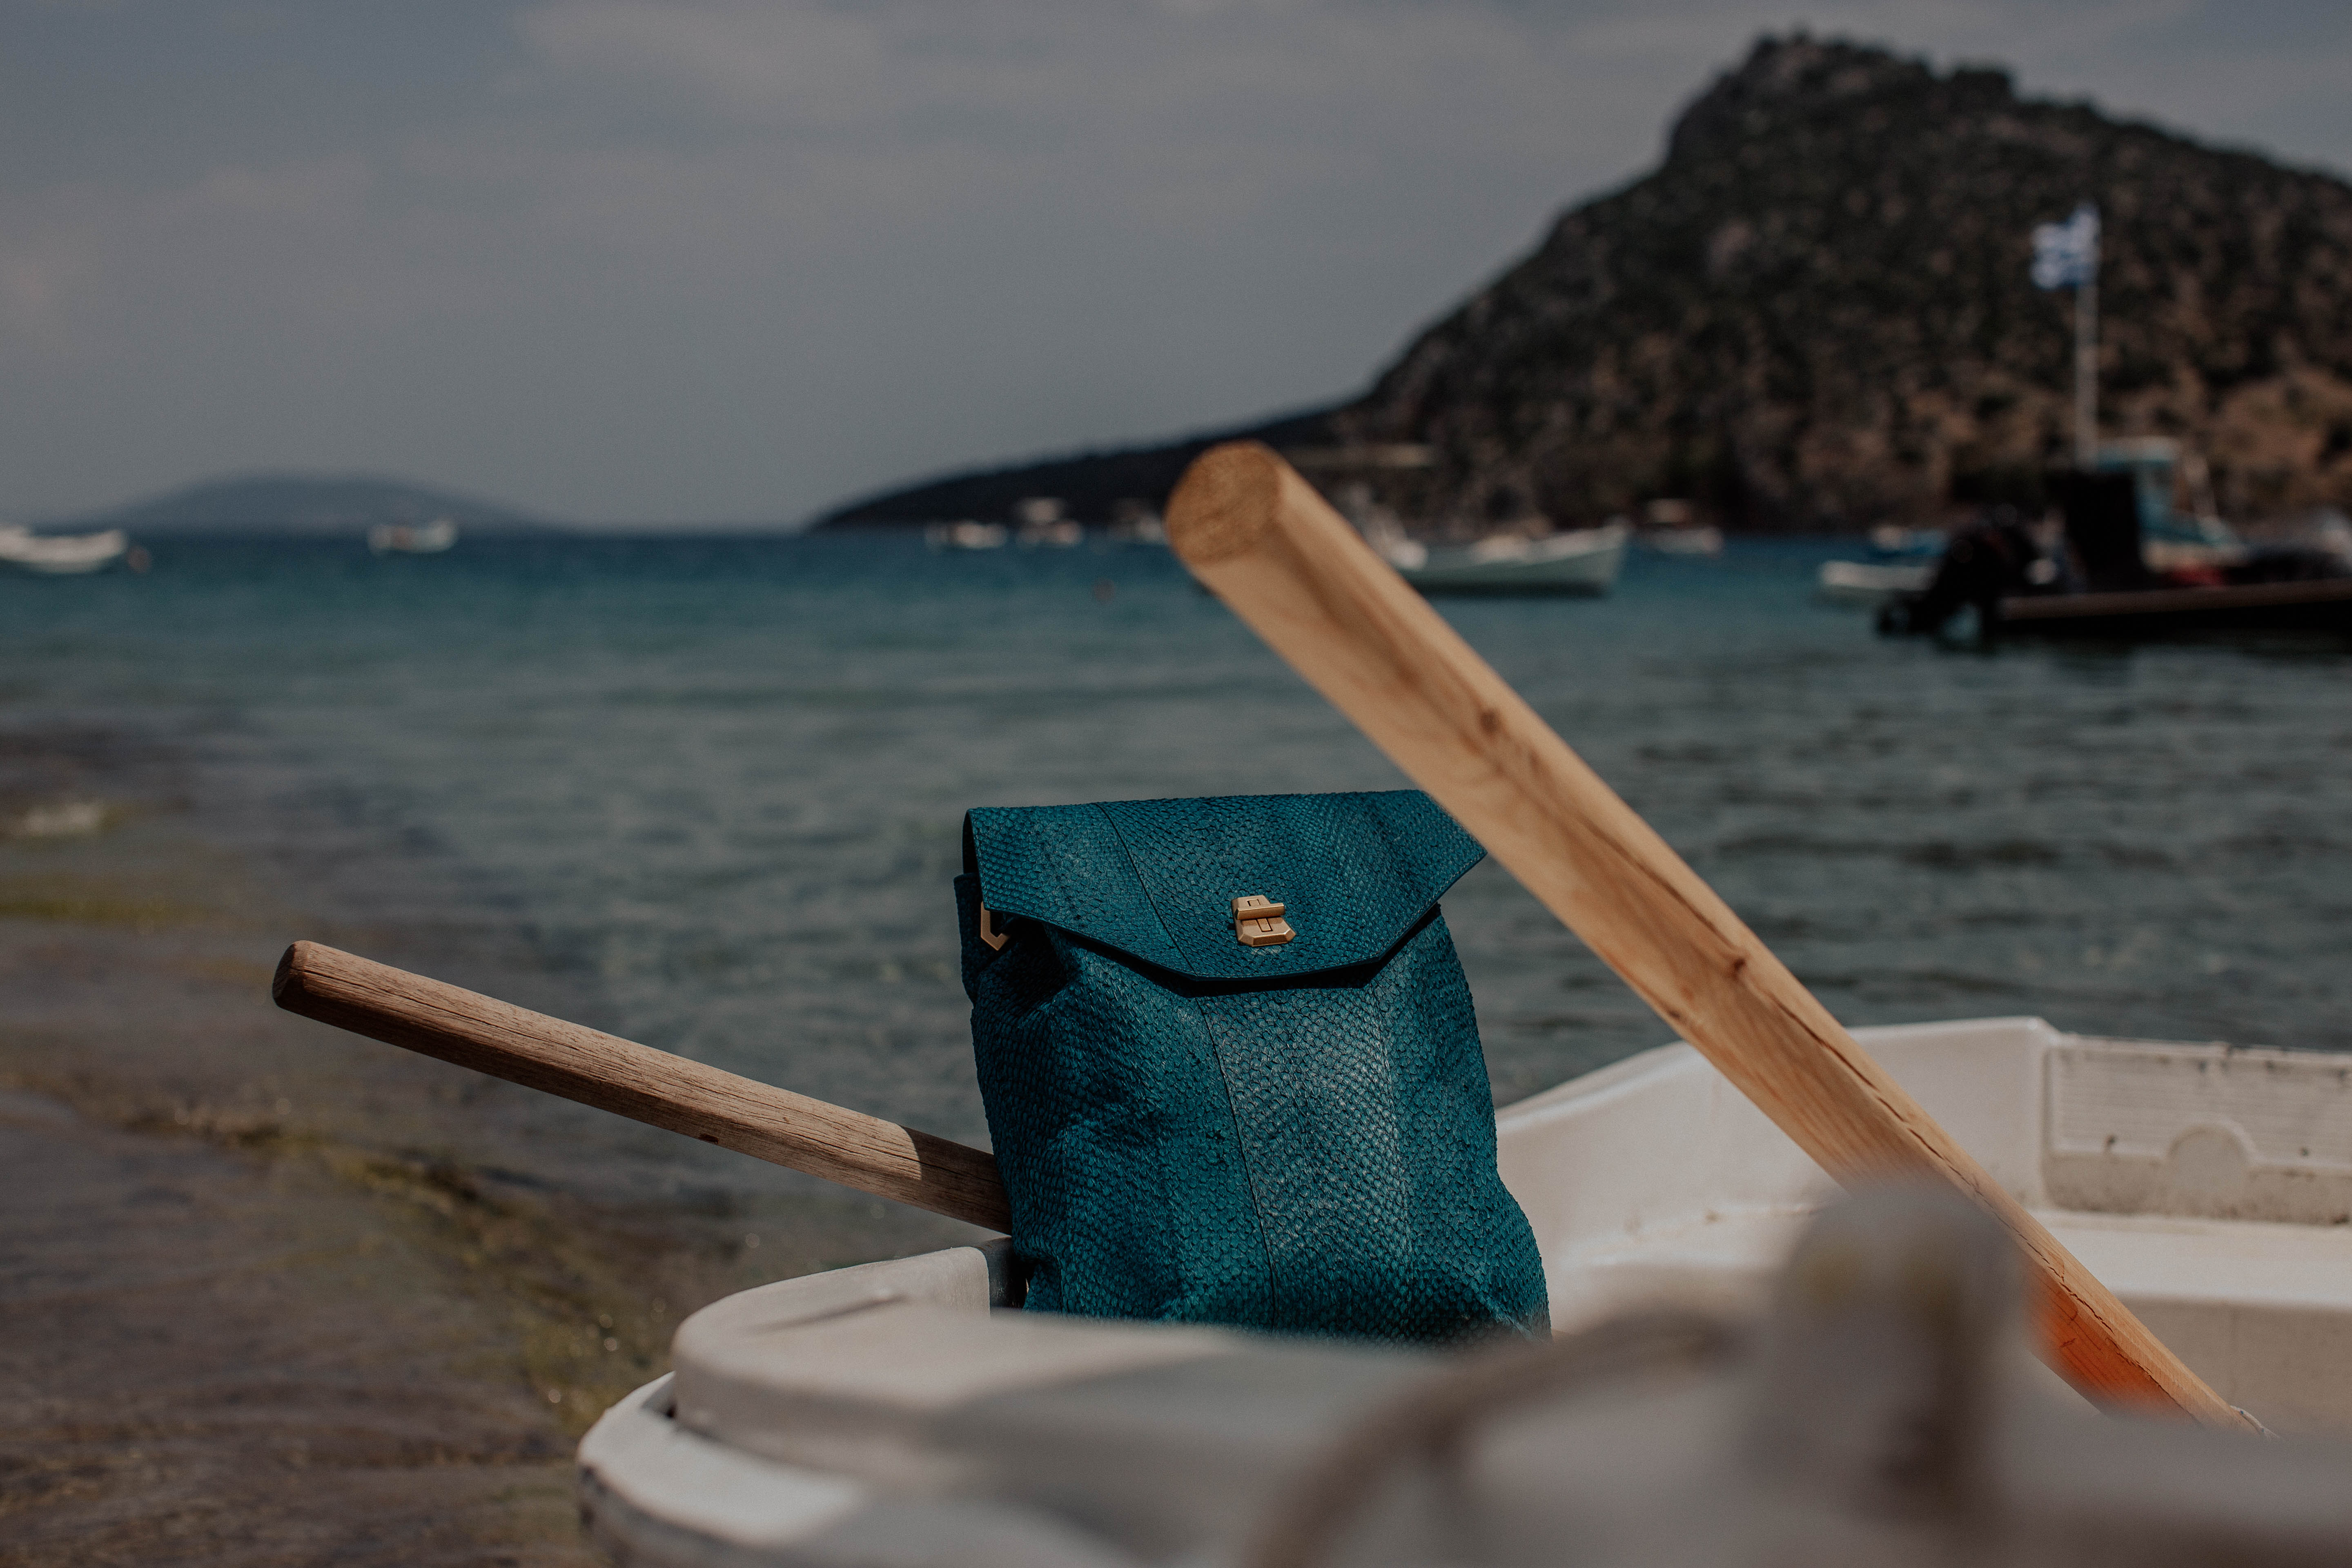 Designer Spotlight on the sustainable accessory brand aitch aitch on NoMad Luxuries